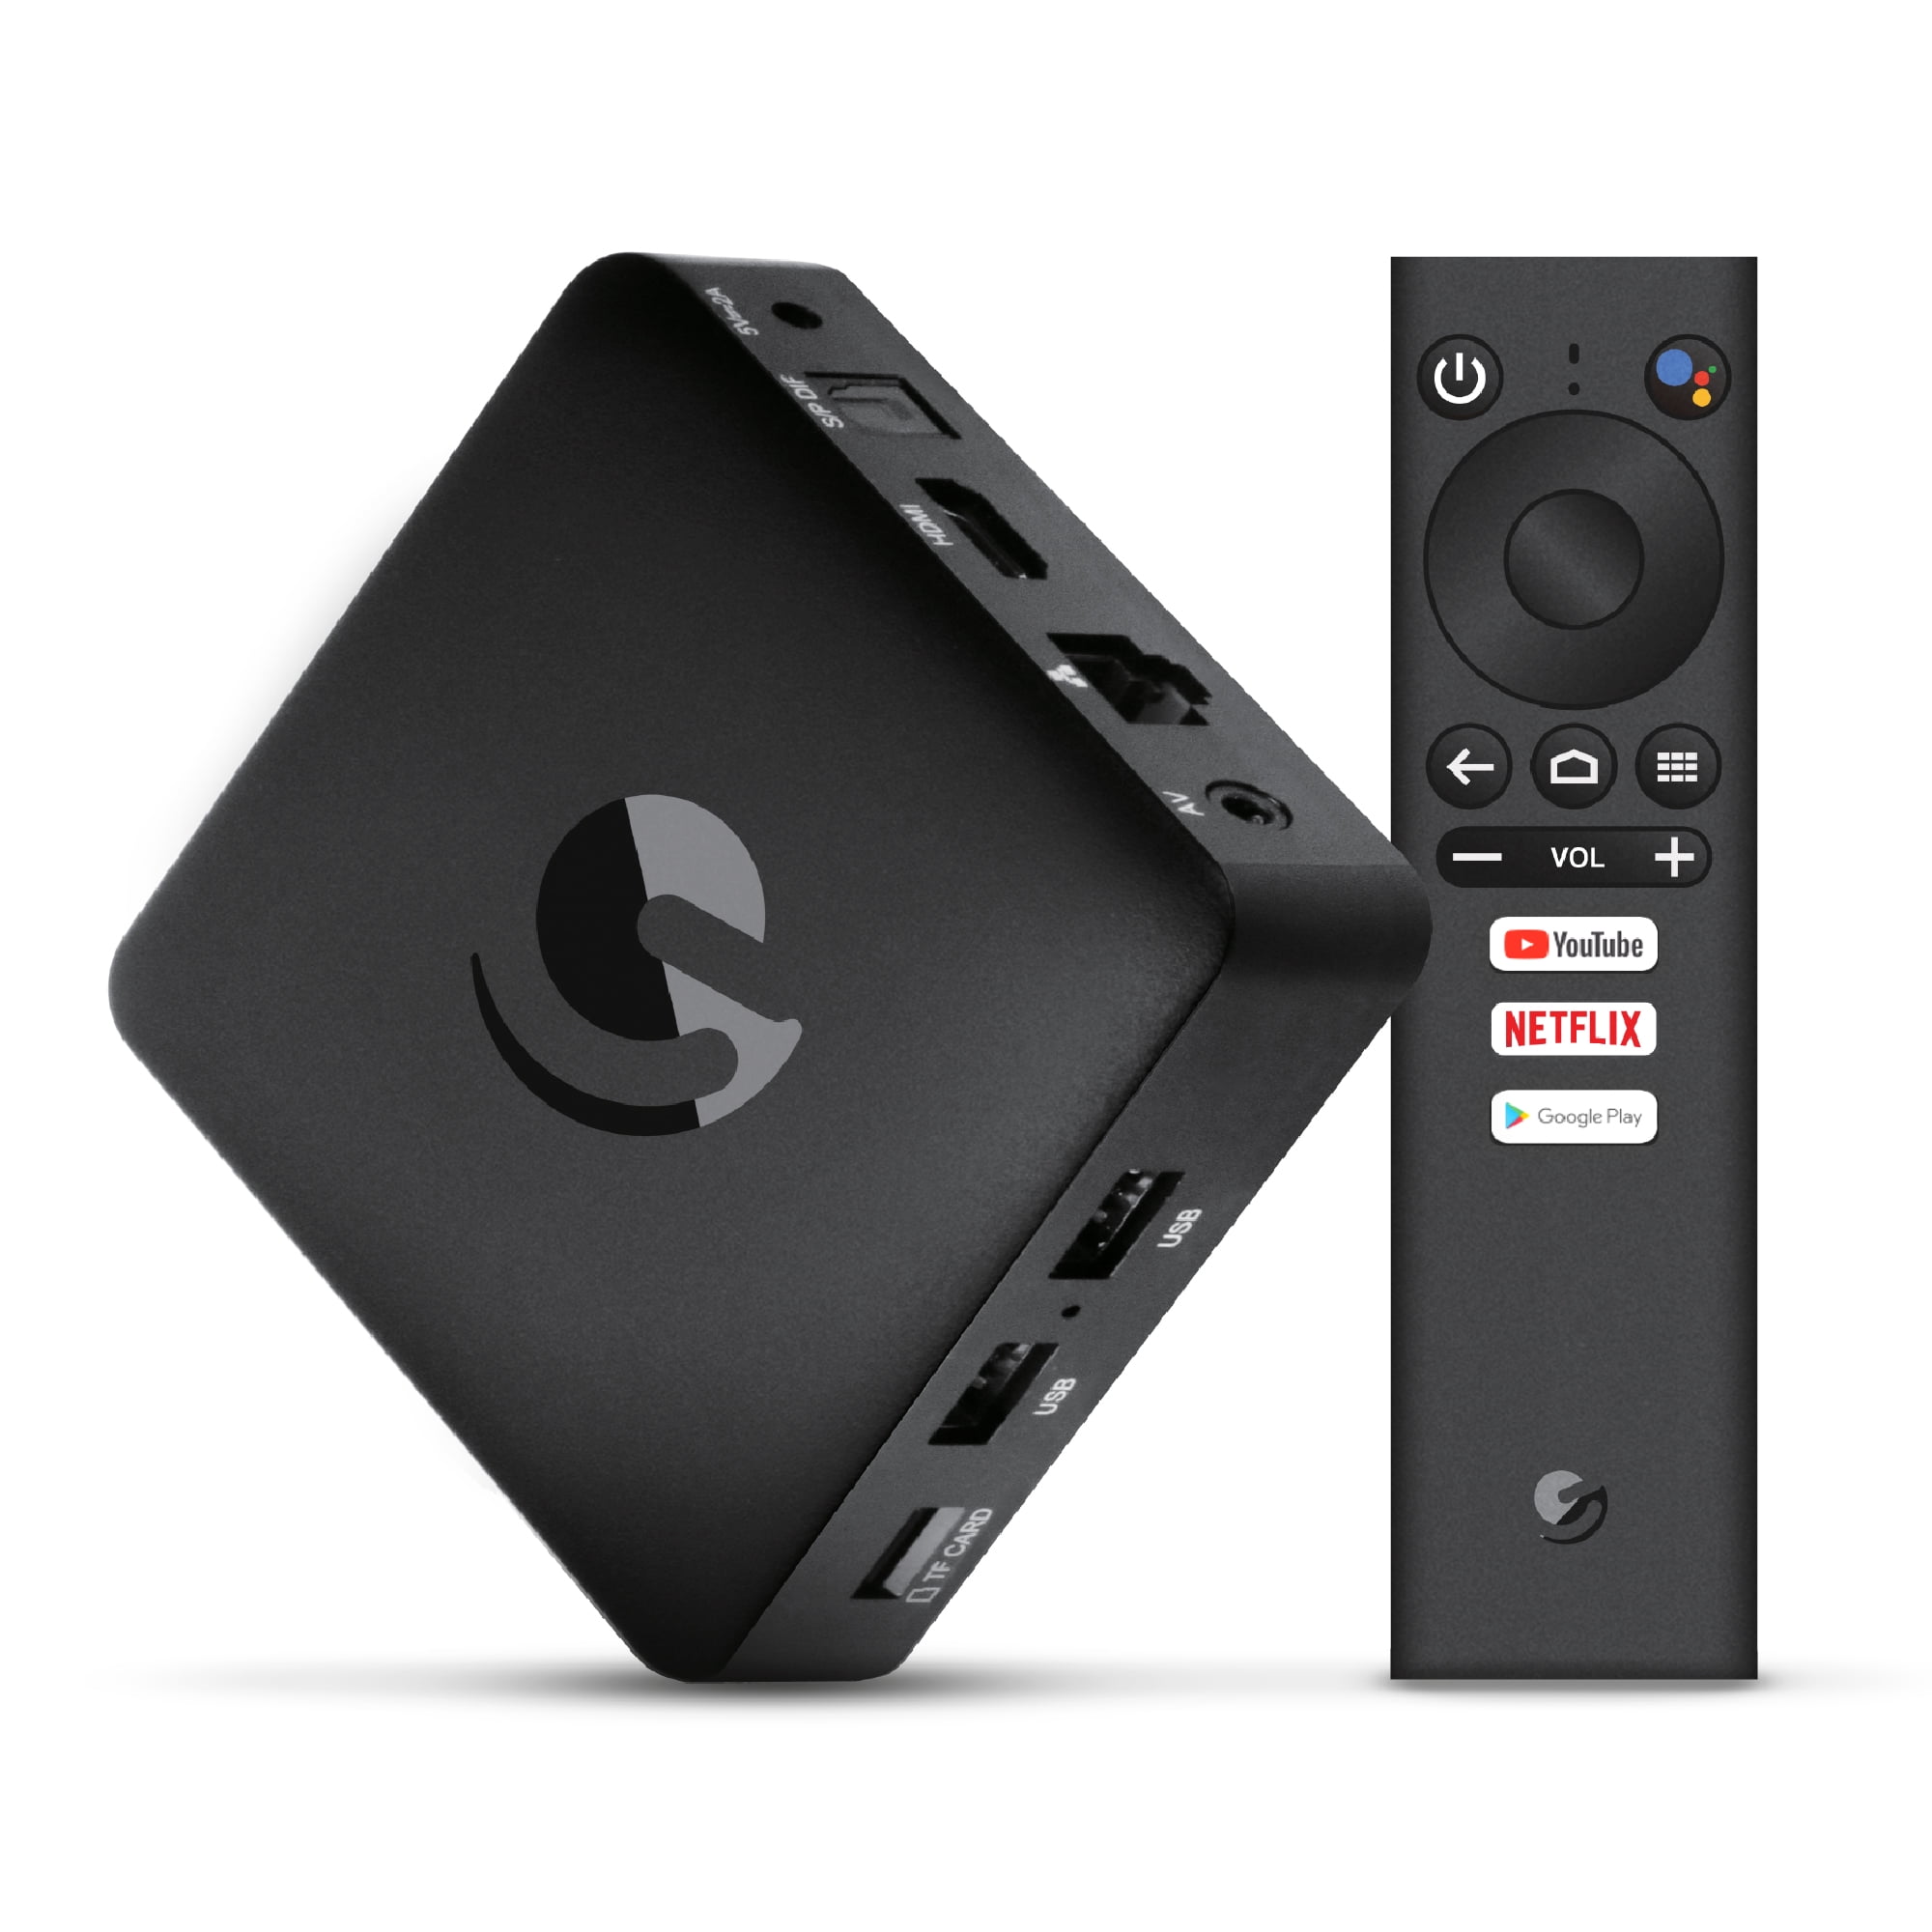 Ematic Jetstream 4K Ultra HD Android TV Box with Voice Search